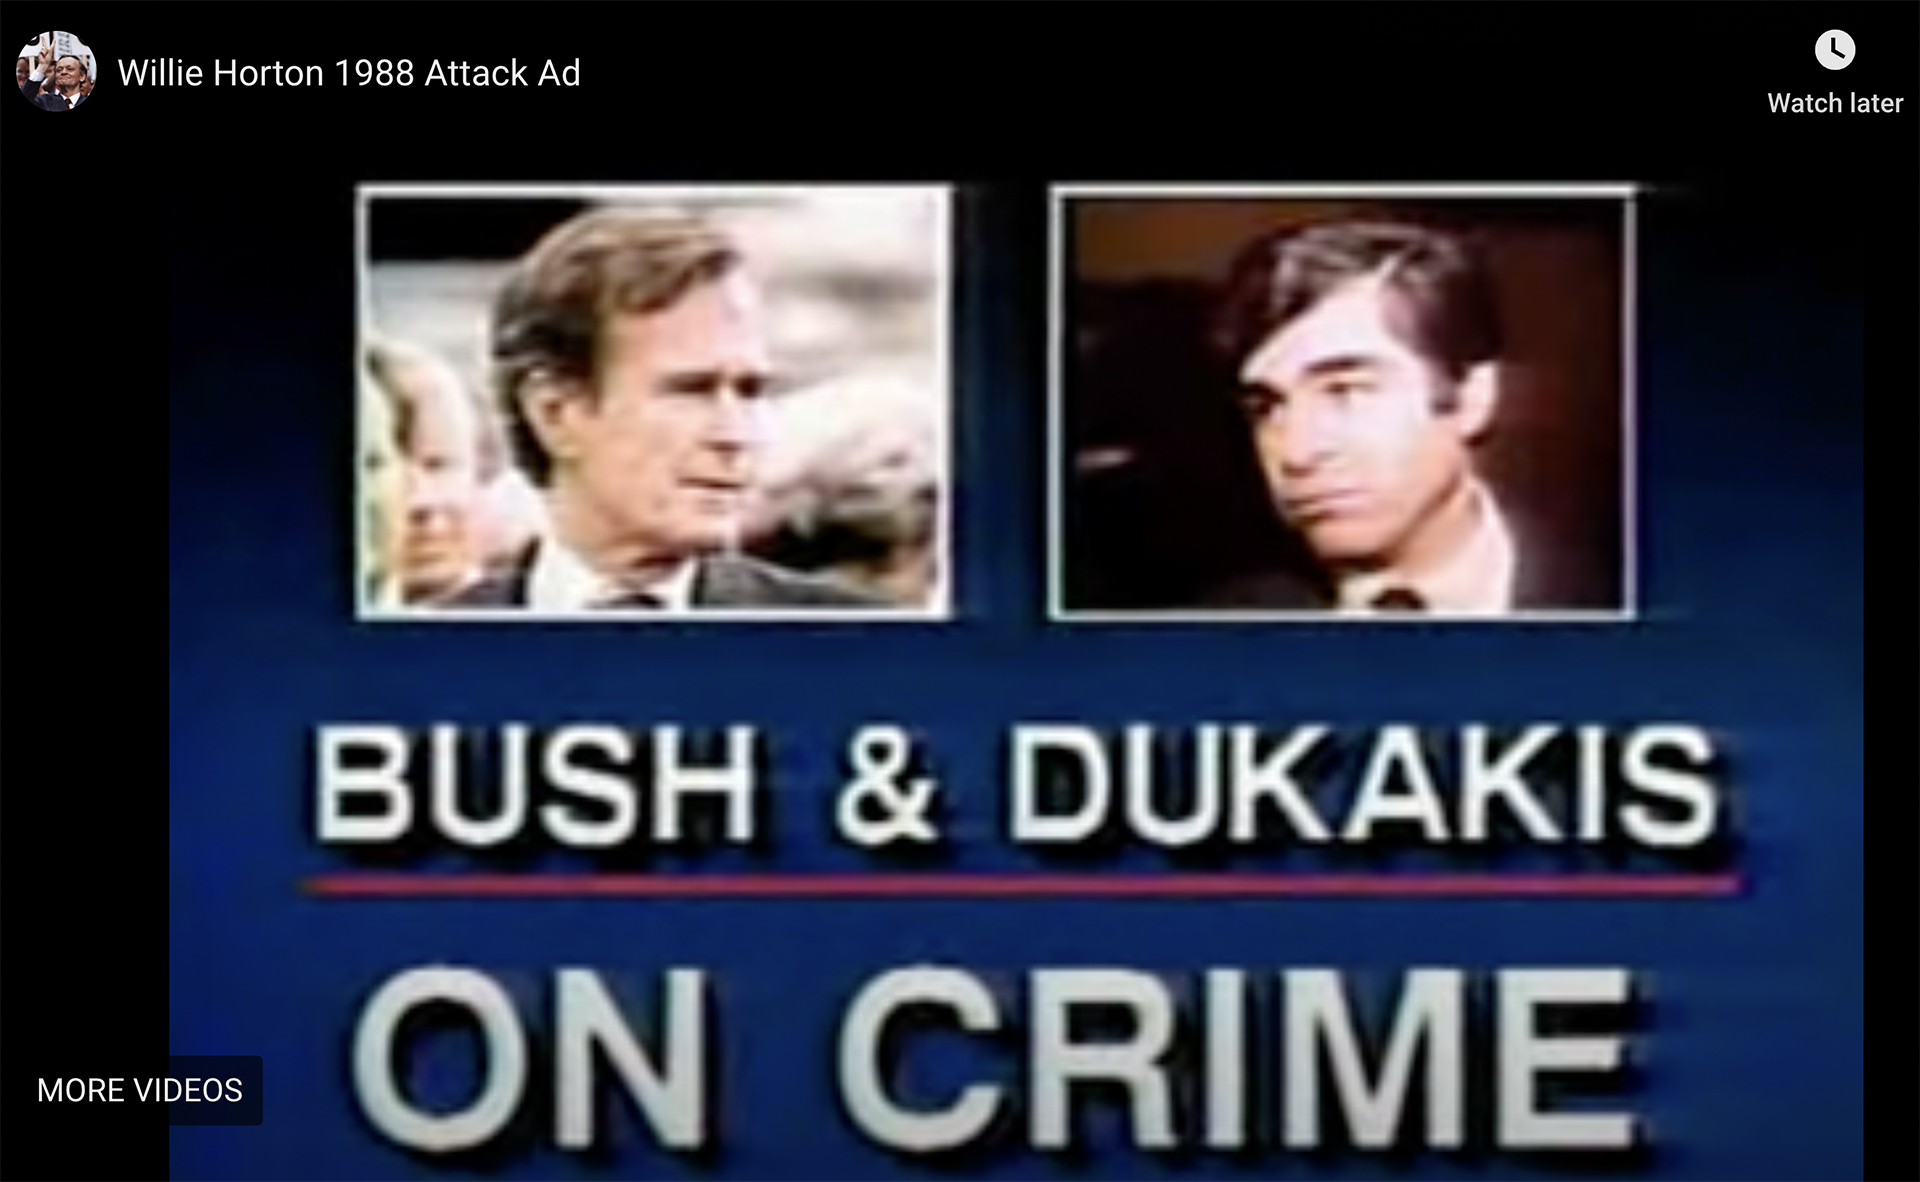 A still image from a video shows portraits of George H.W. Bush and Michael Dukakis along with the words "Bush & Dukakis" and "On Crime."